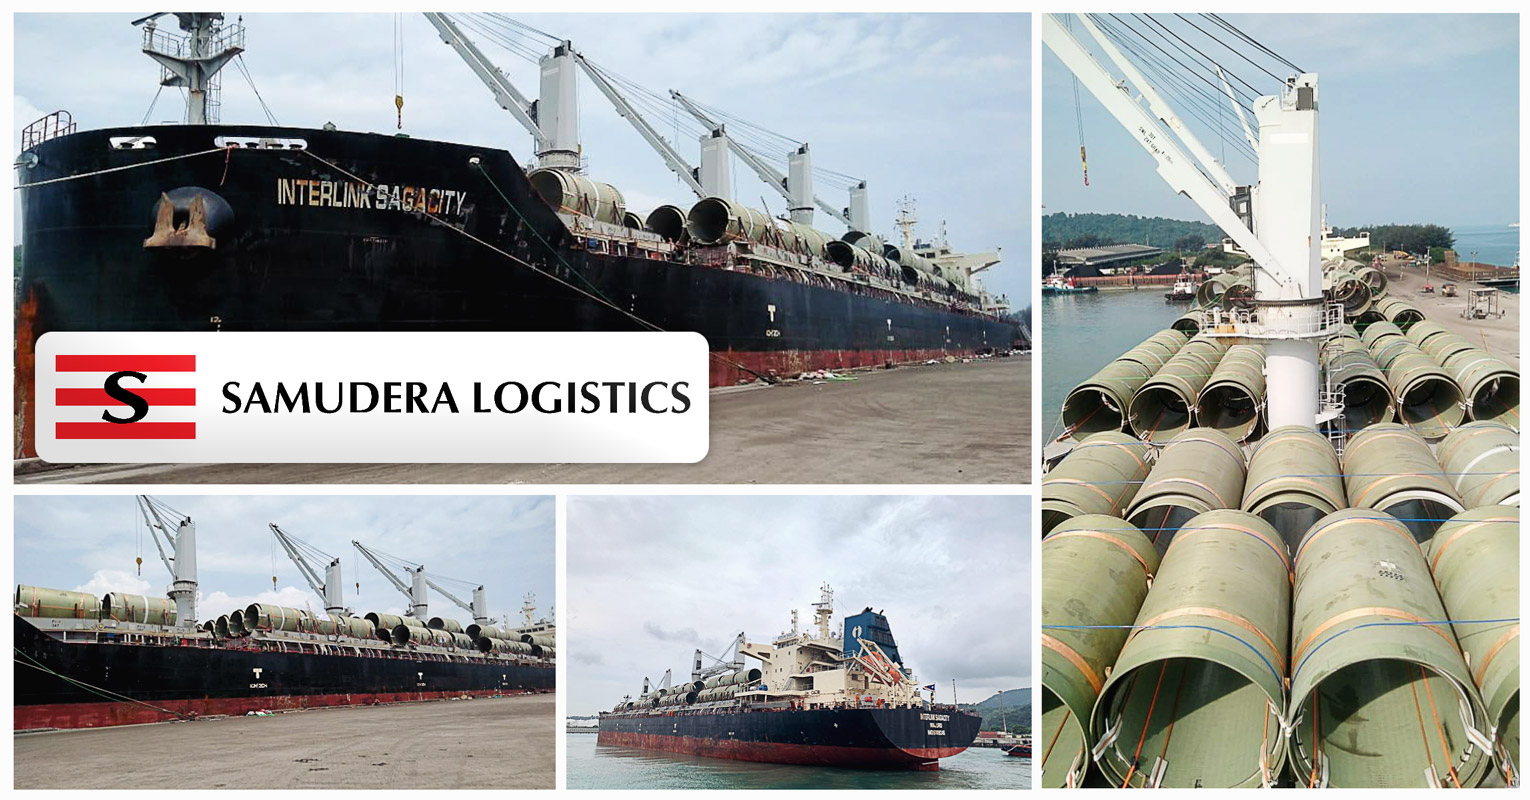 Pt Silkargo Indonesia Shipped a Total of 329 Pcs Weighing 2,837.55 Kg and Measuring 26,179 Cbm Onboard Mv Interlink Sagacity